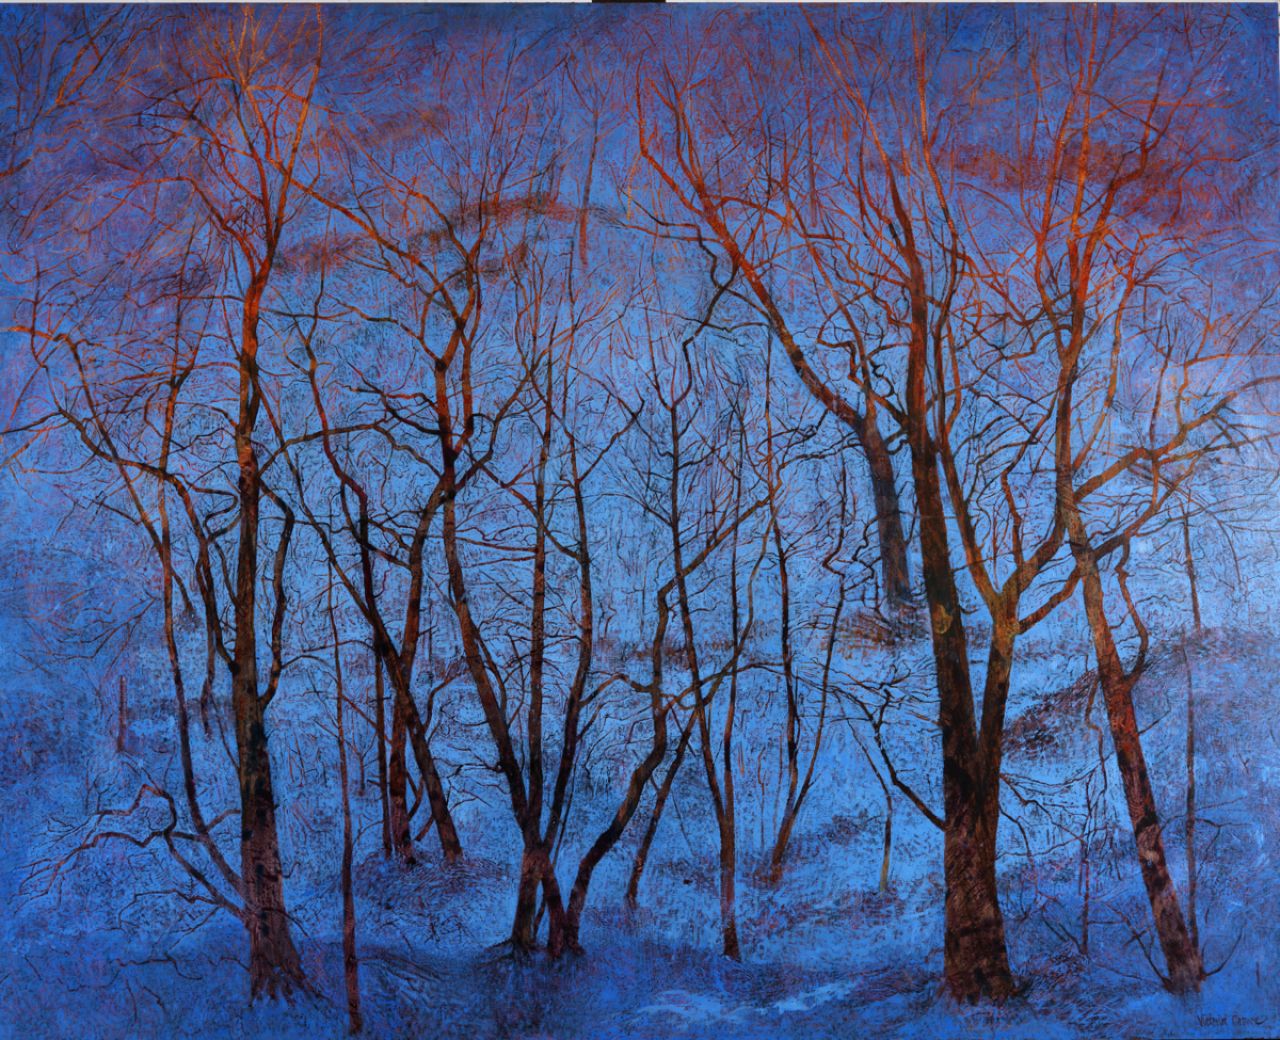 Blue Snow and Fiery Trees, 2011 oil on linen, 101.5 x 127 cm